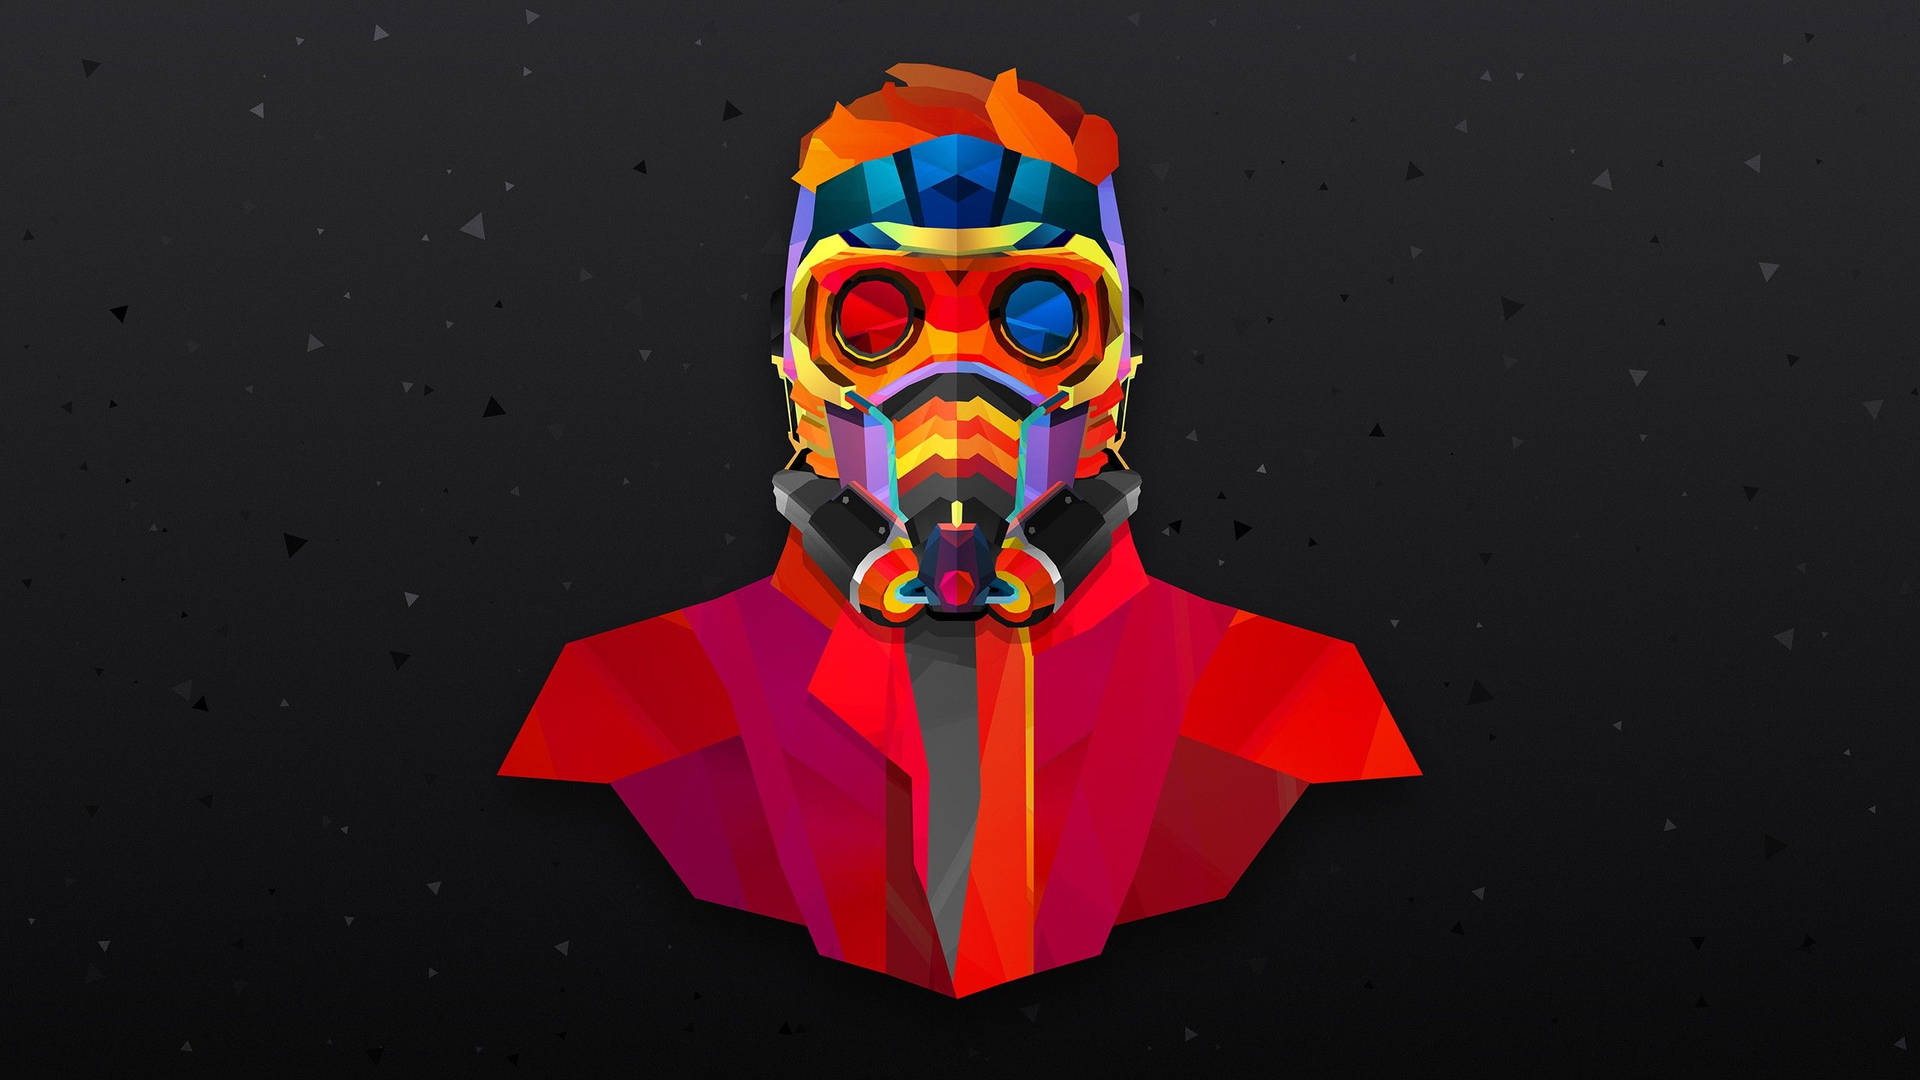 Marvel Star Lord Colorful Abstract Digital Art